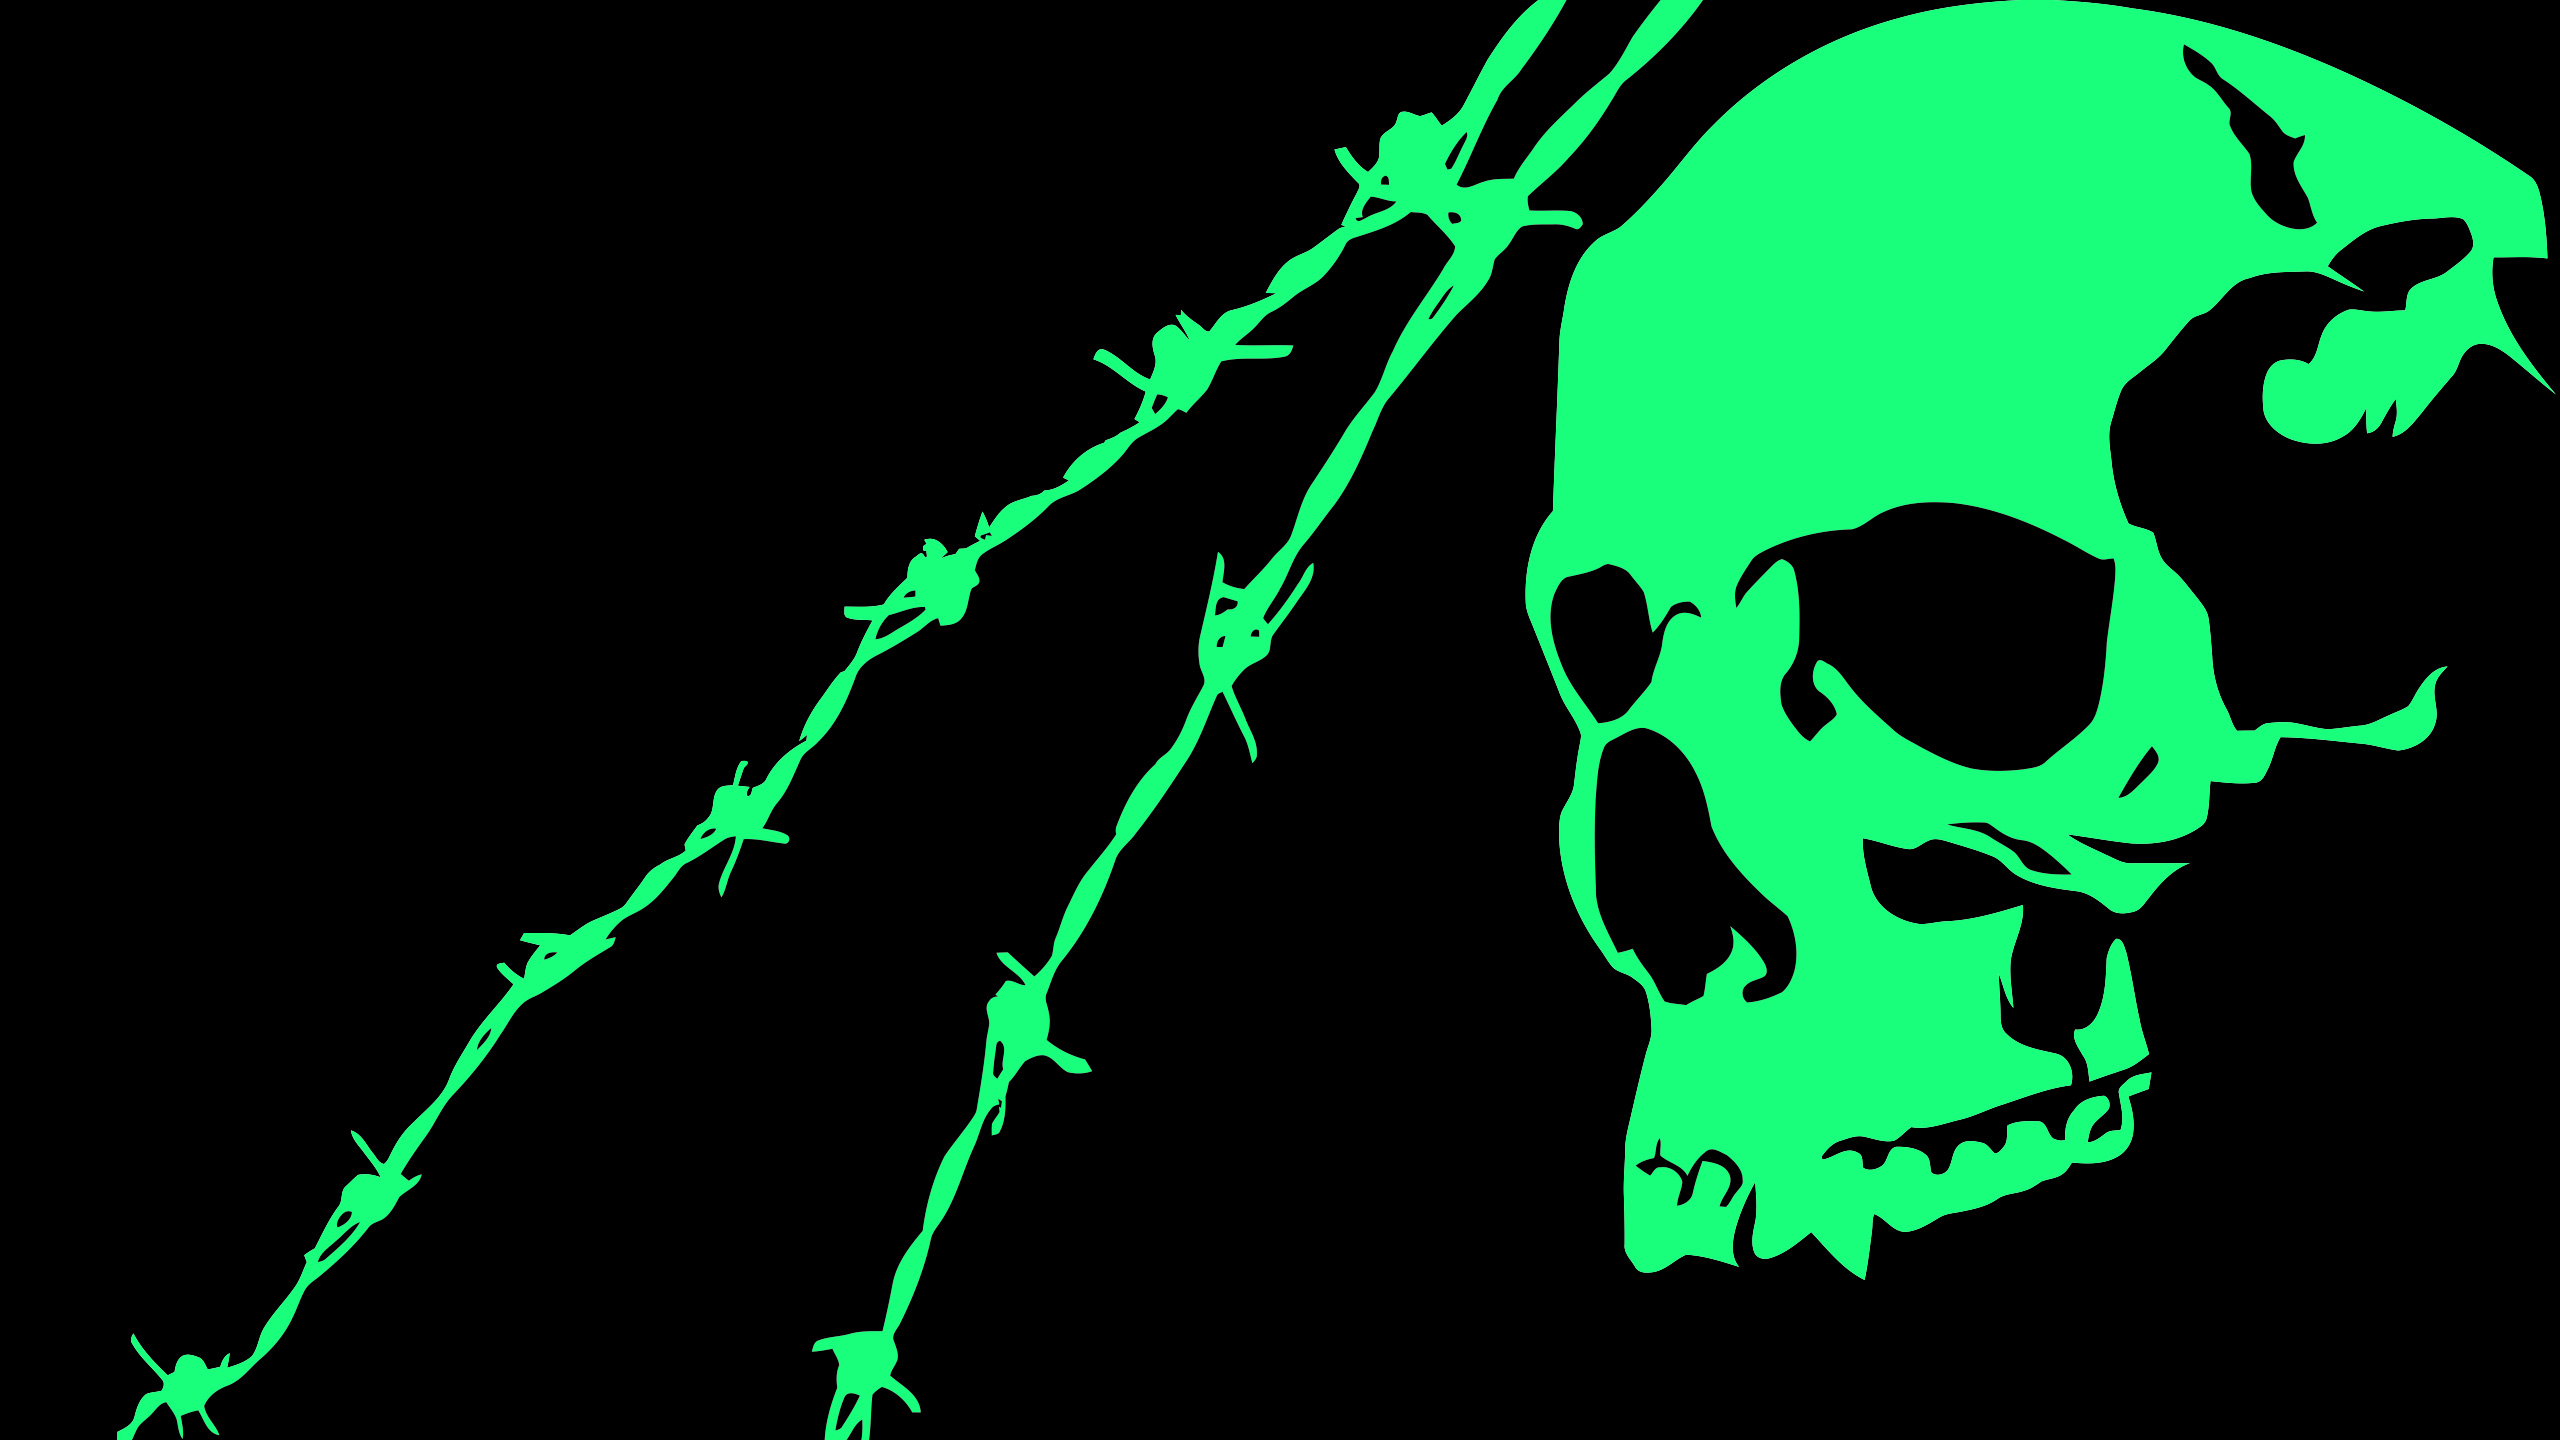 Black green skull minimalist hd artist k wallpapers images backgrounds photos and pictures